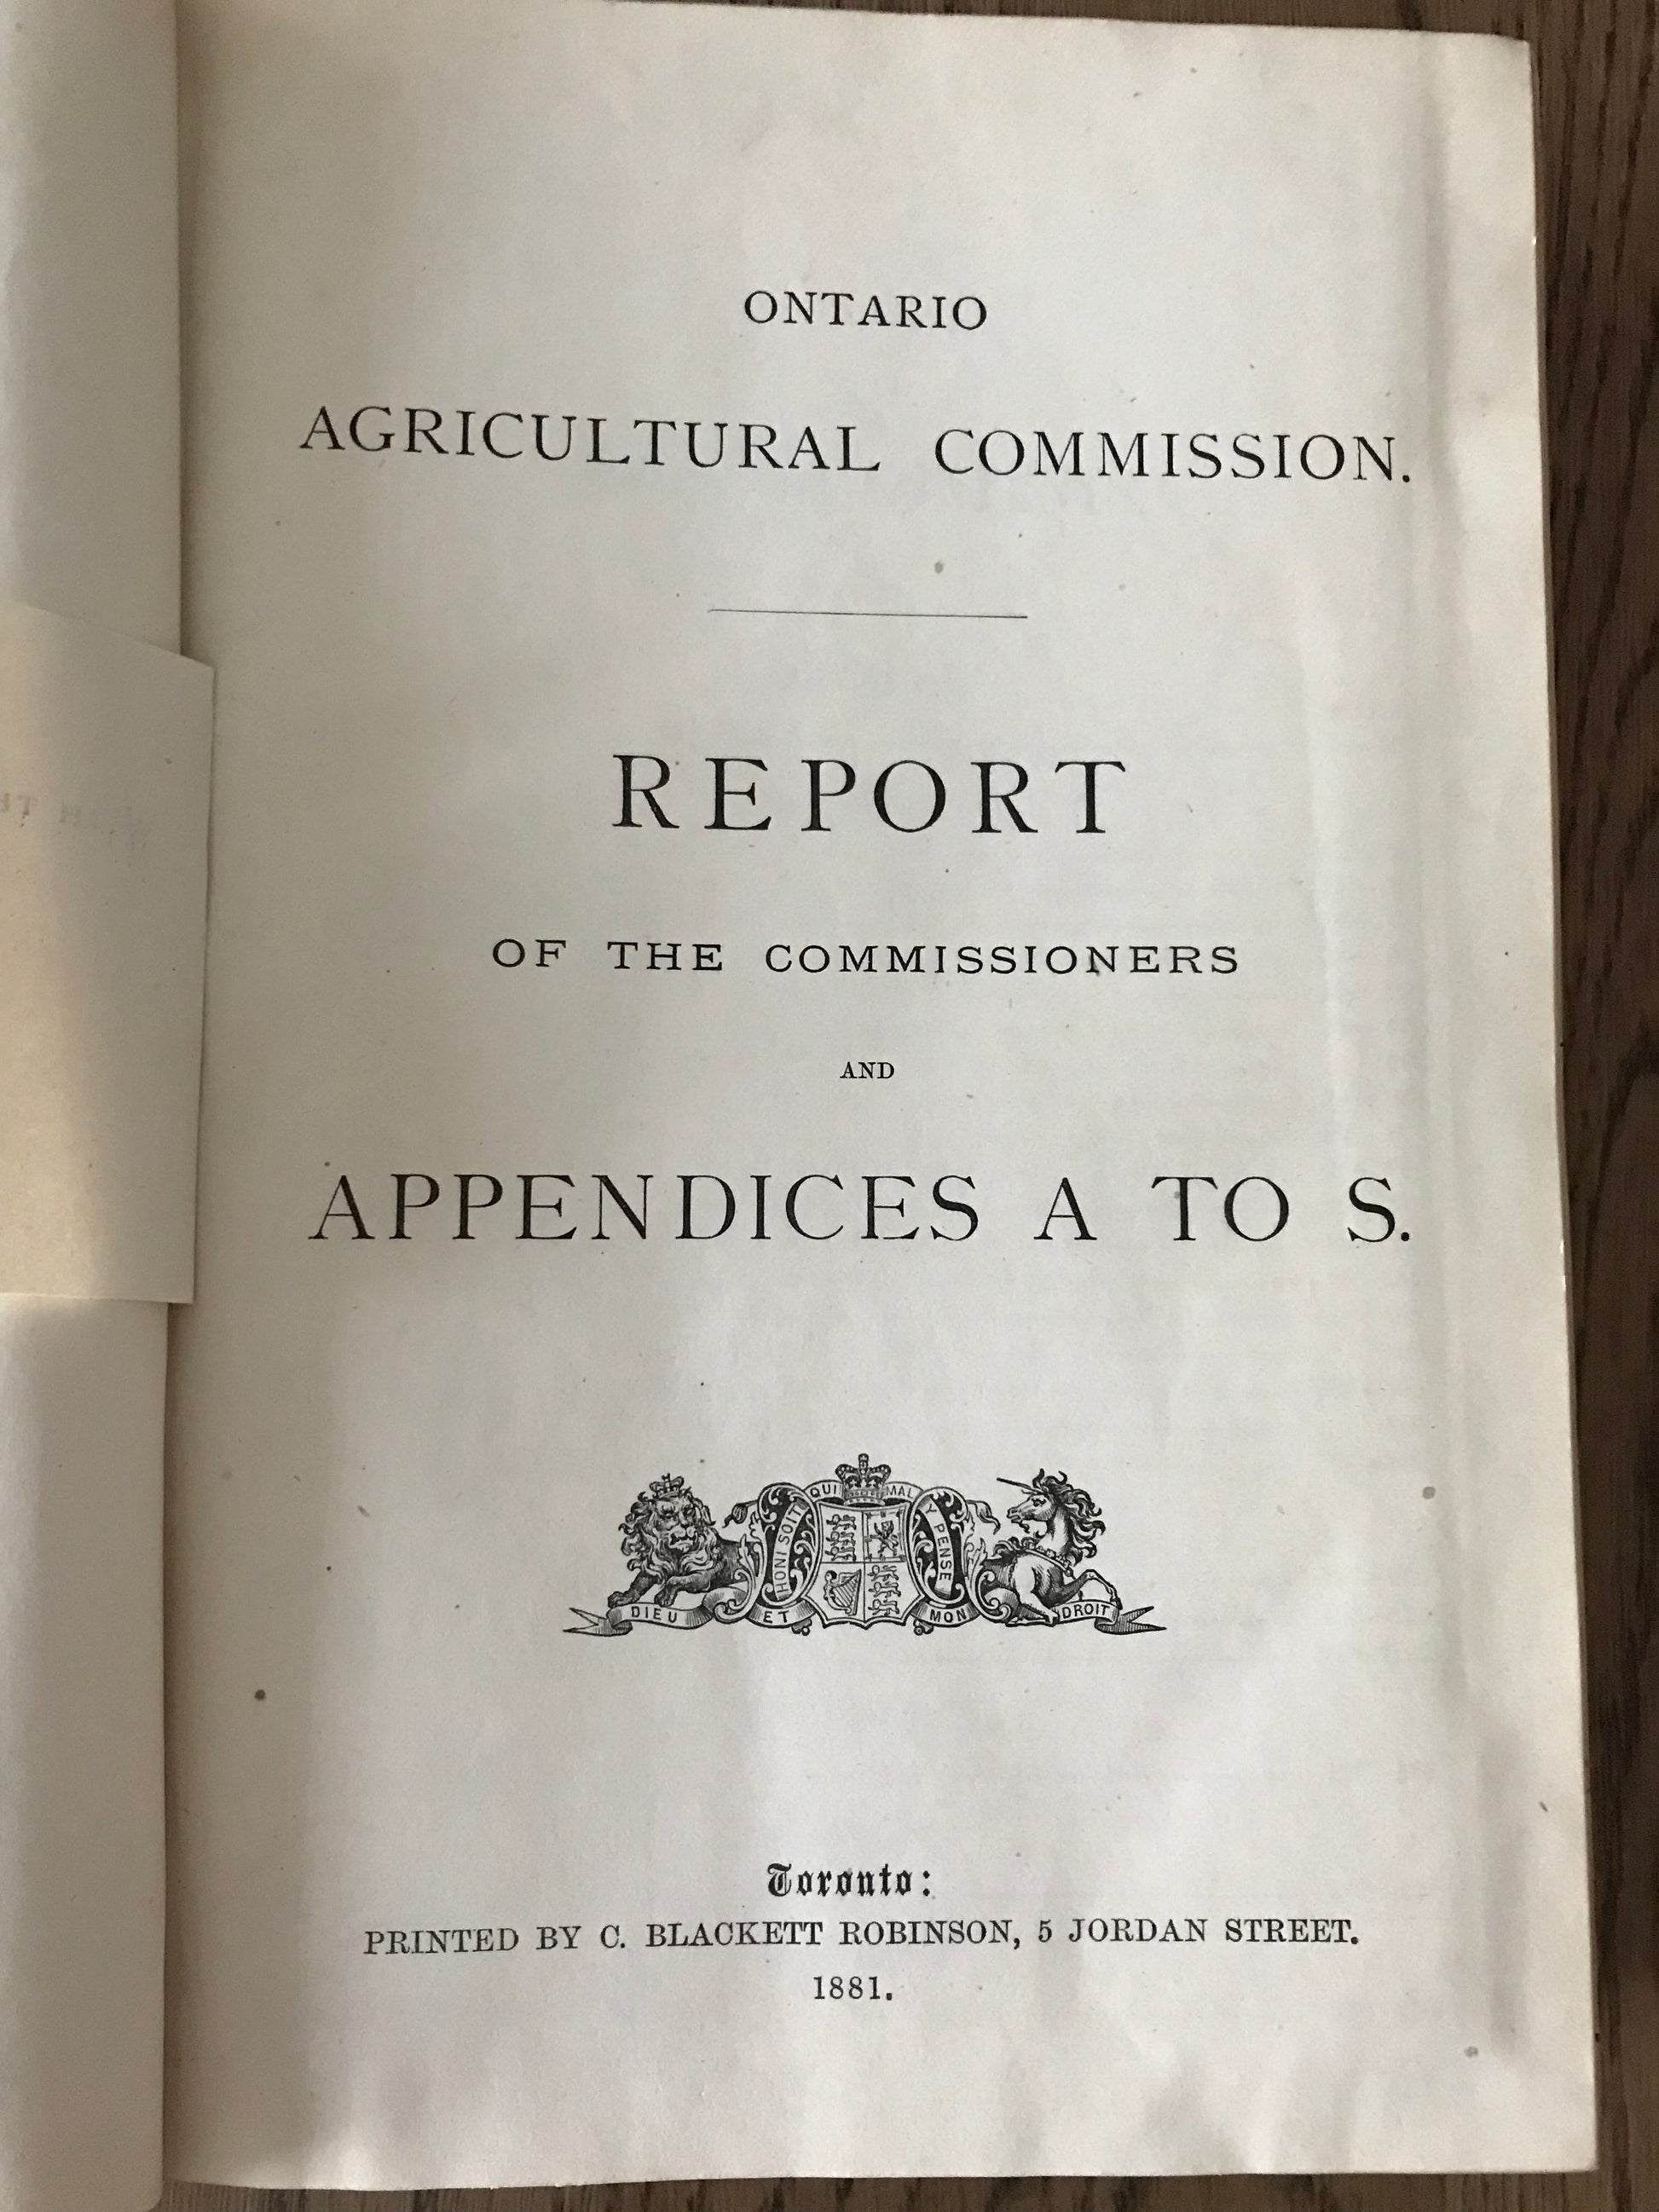 ONTARIO AGRICULTURAL COMMISSION REPORT ... AND APPENDICES .... UNATTRIBUTED BooksCardsNBikes